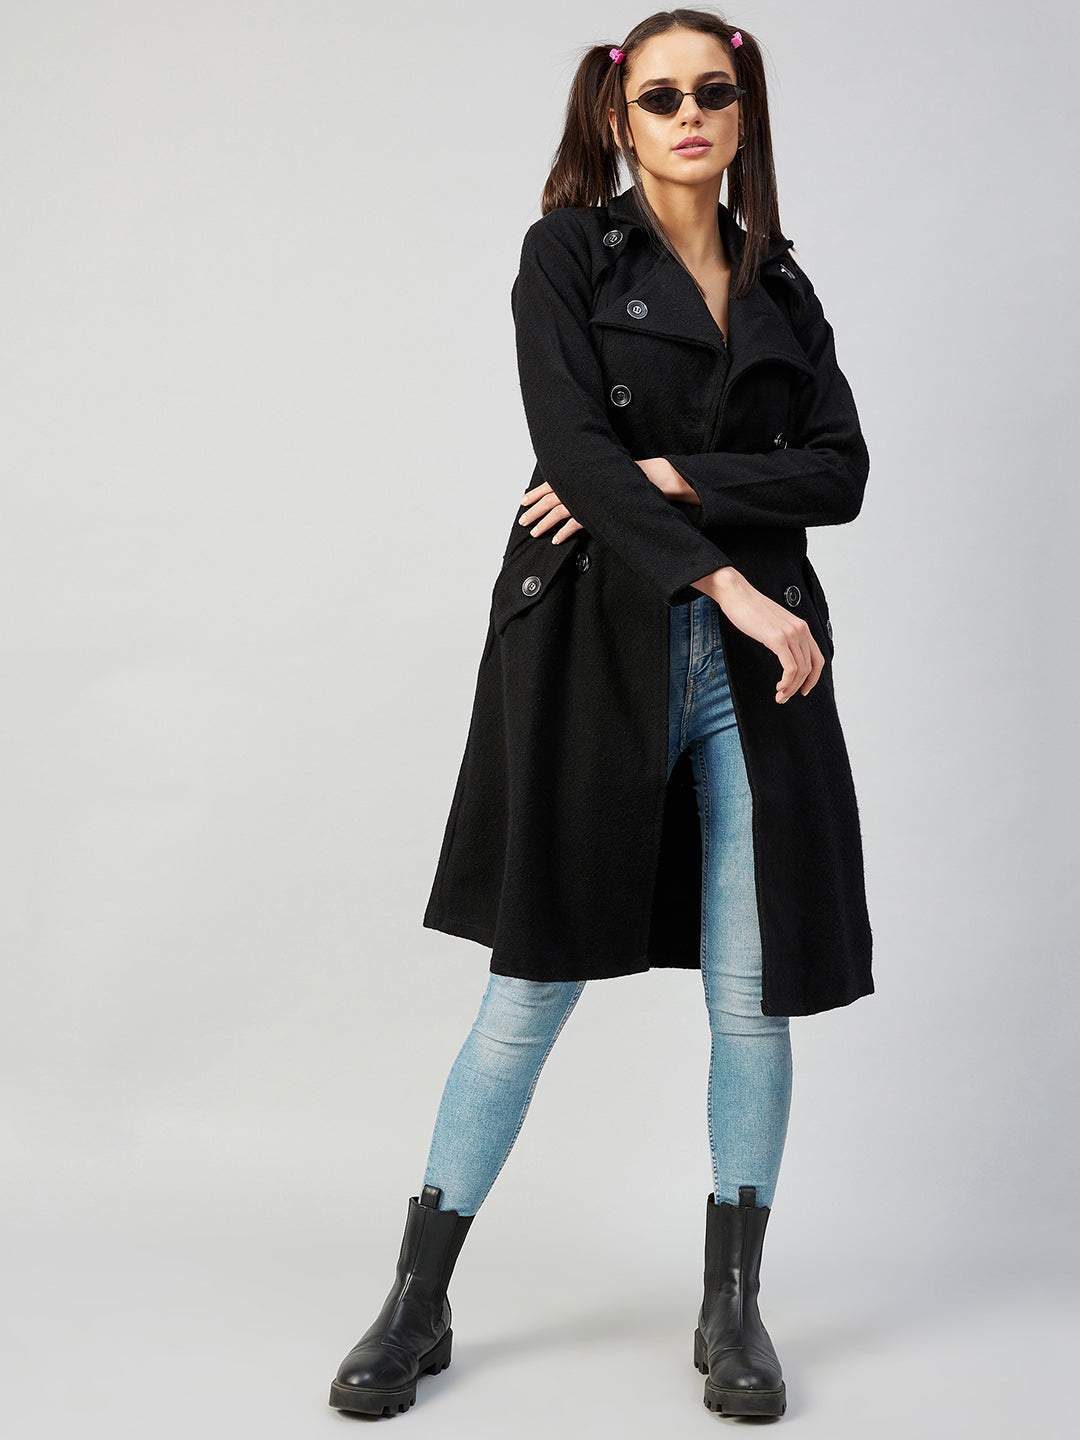 Athena Women Black Solid Double Breasted Trench Coat - Athena Lifestyle